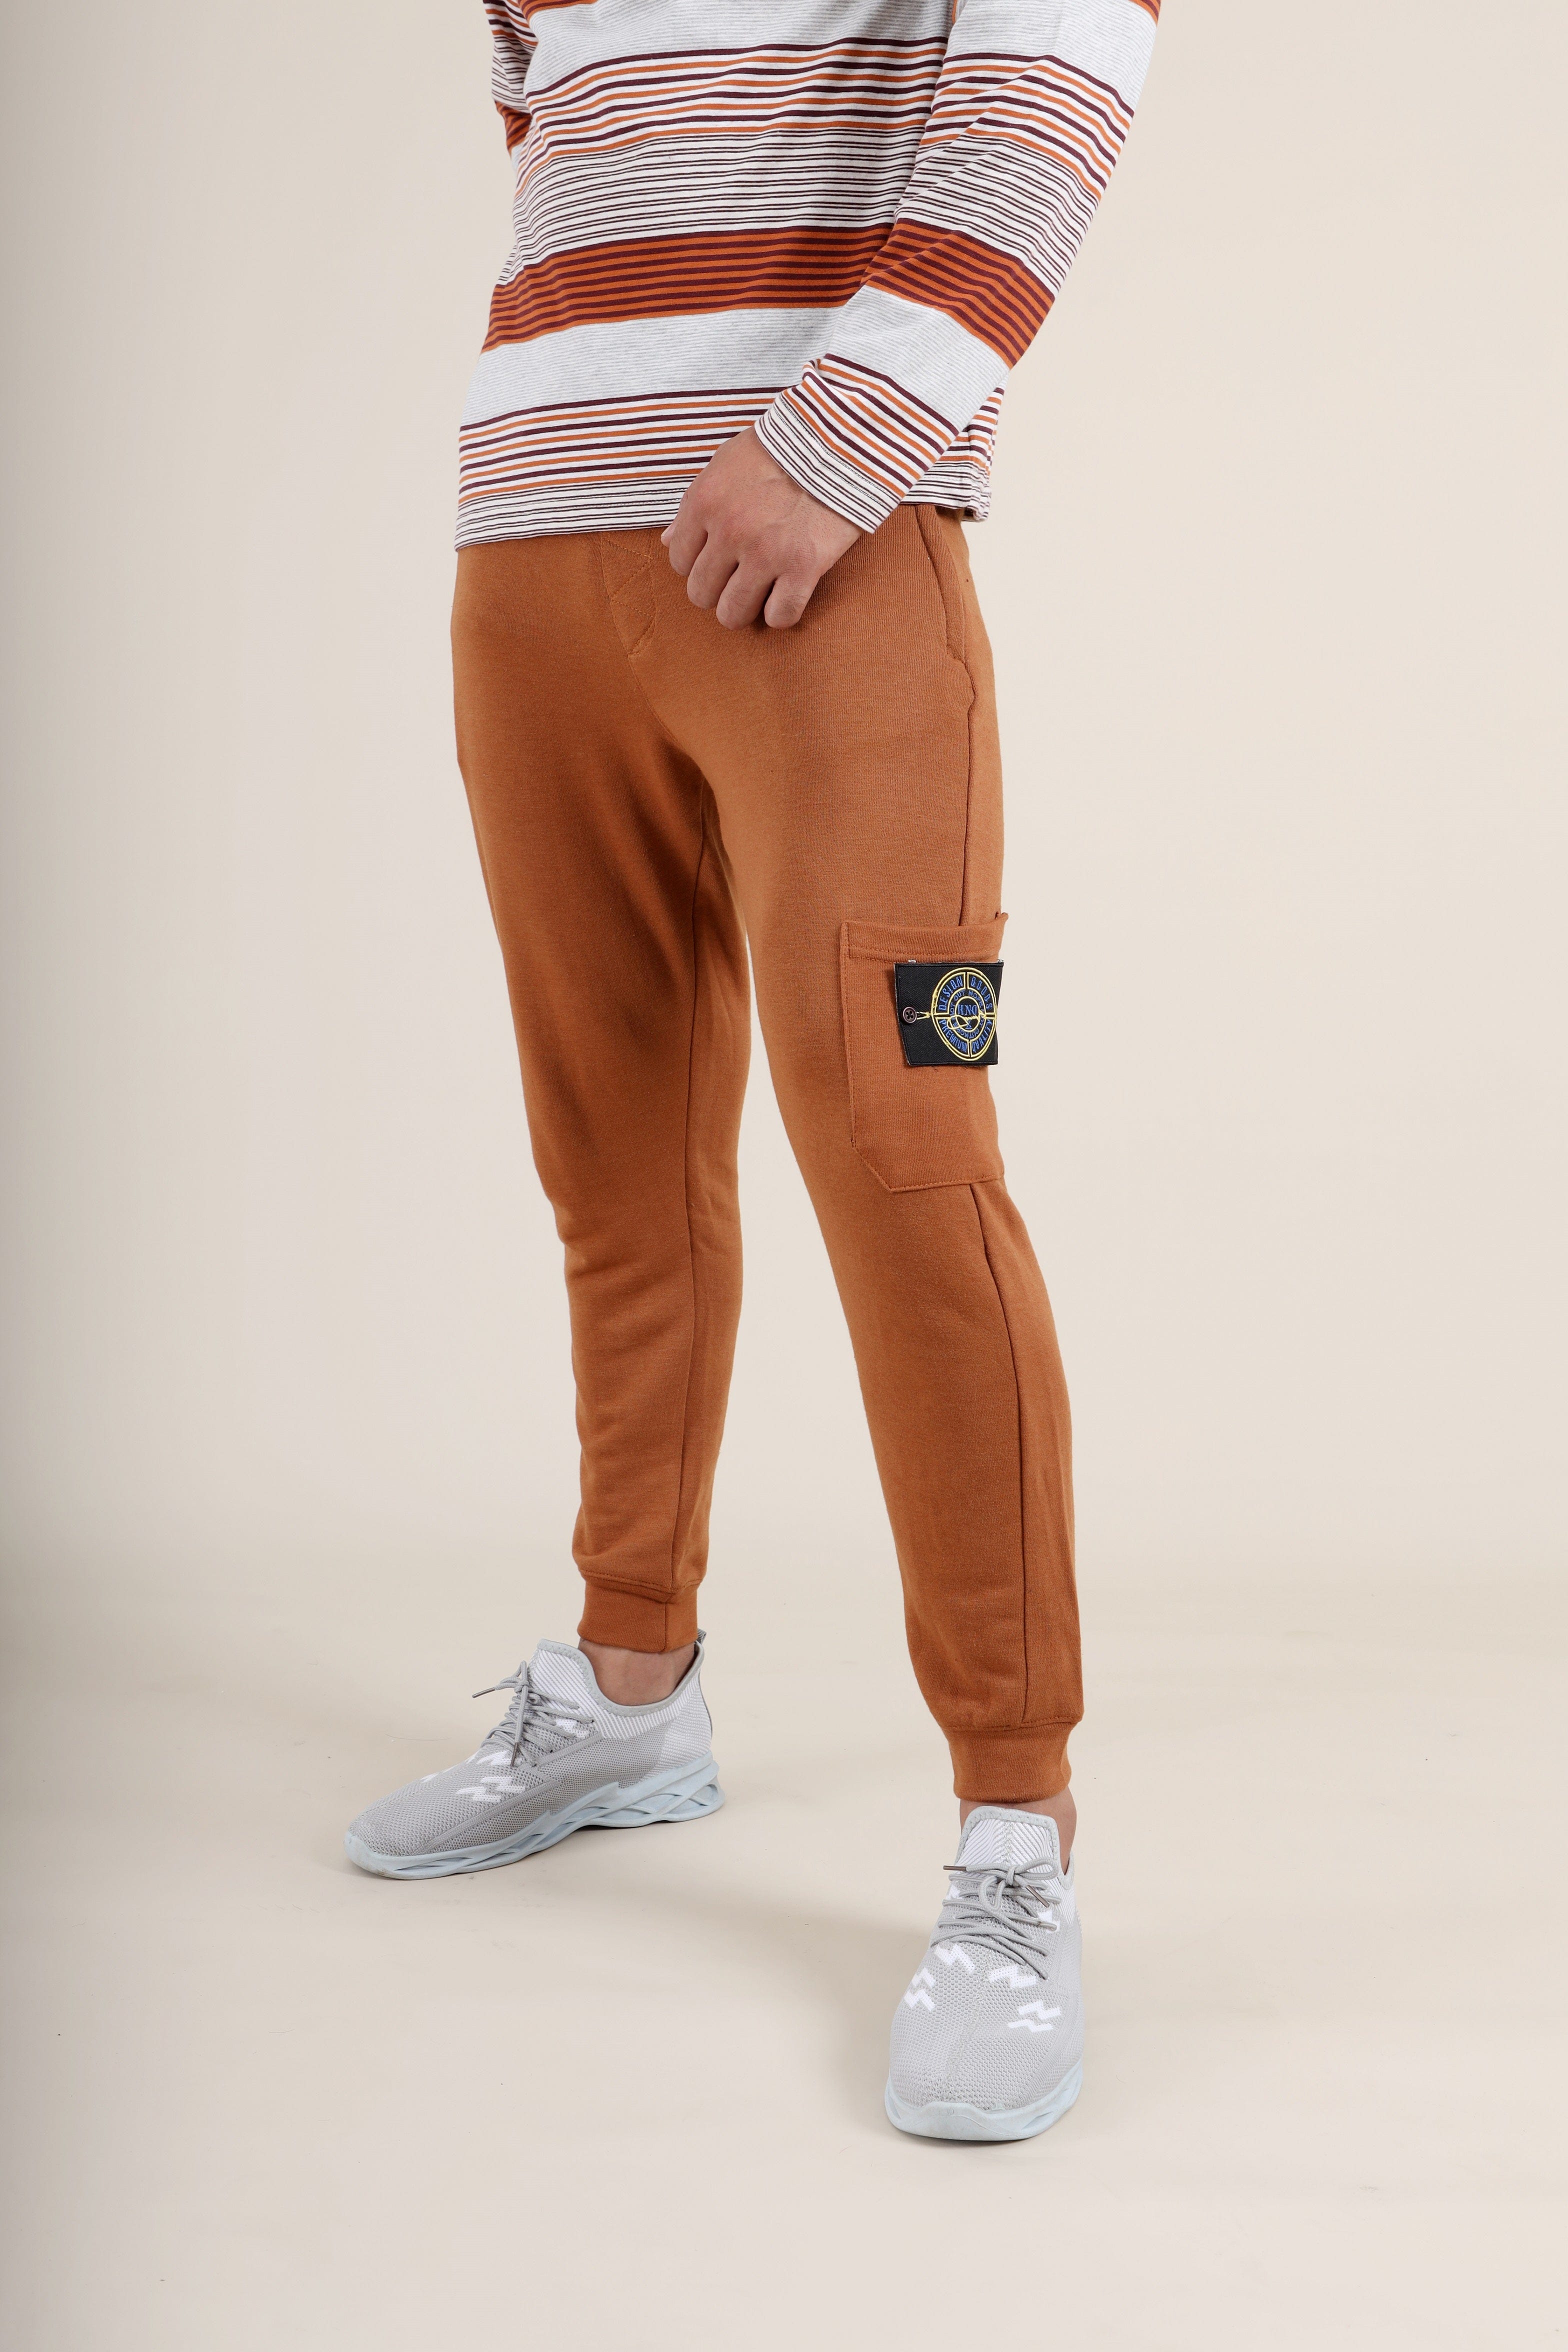 Hope Not Out by Shahid Afridi Men Trouser Fashion Graphic Trouser